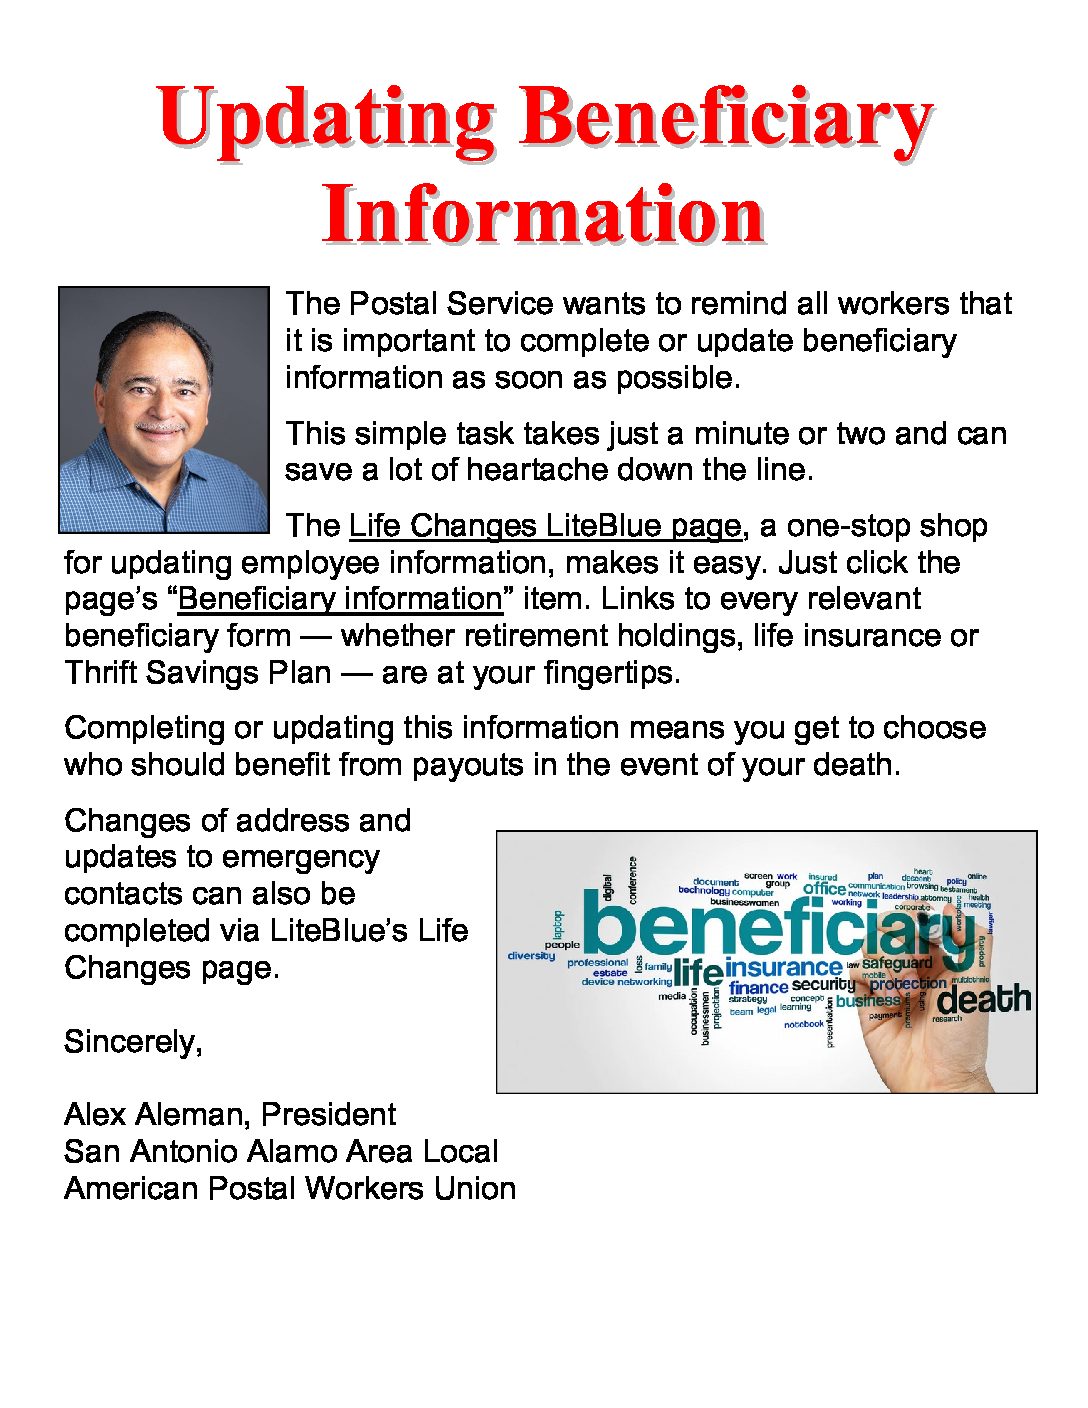 Updating Beneficiary Information - 